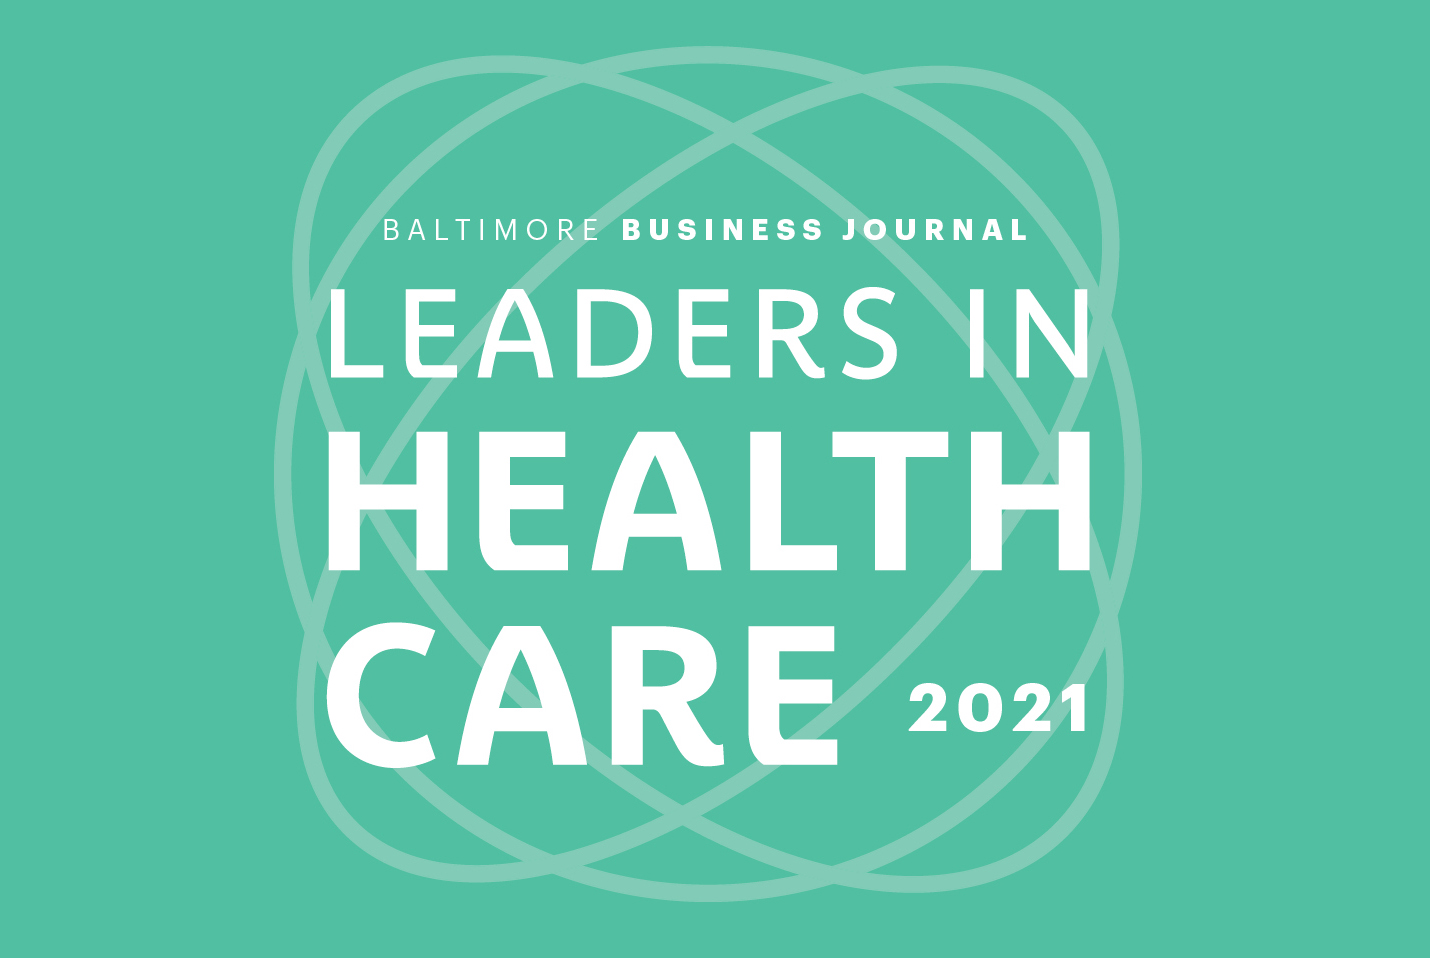 Baltimore Business Journal Leaders in Health Care 2021